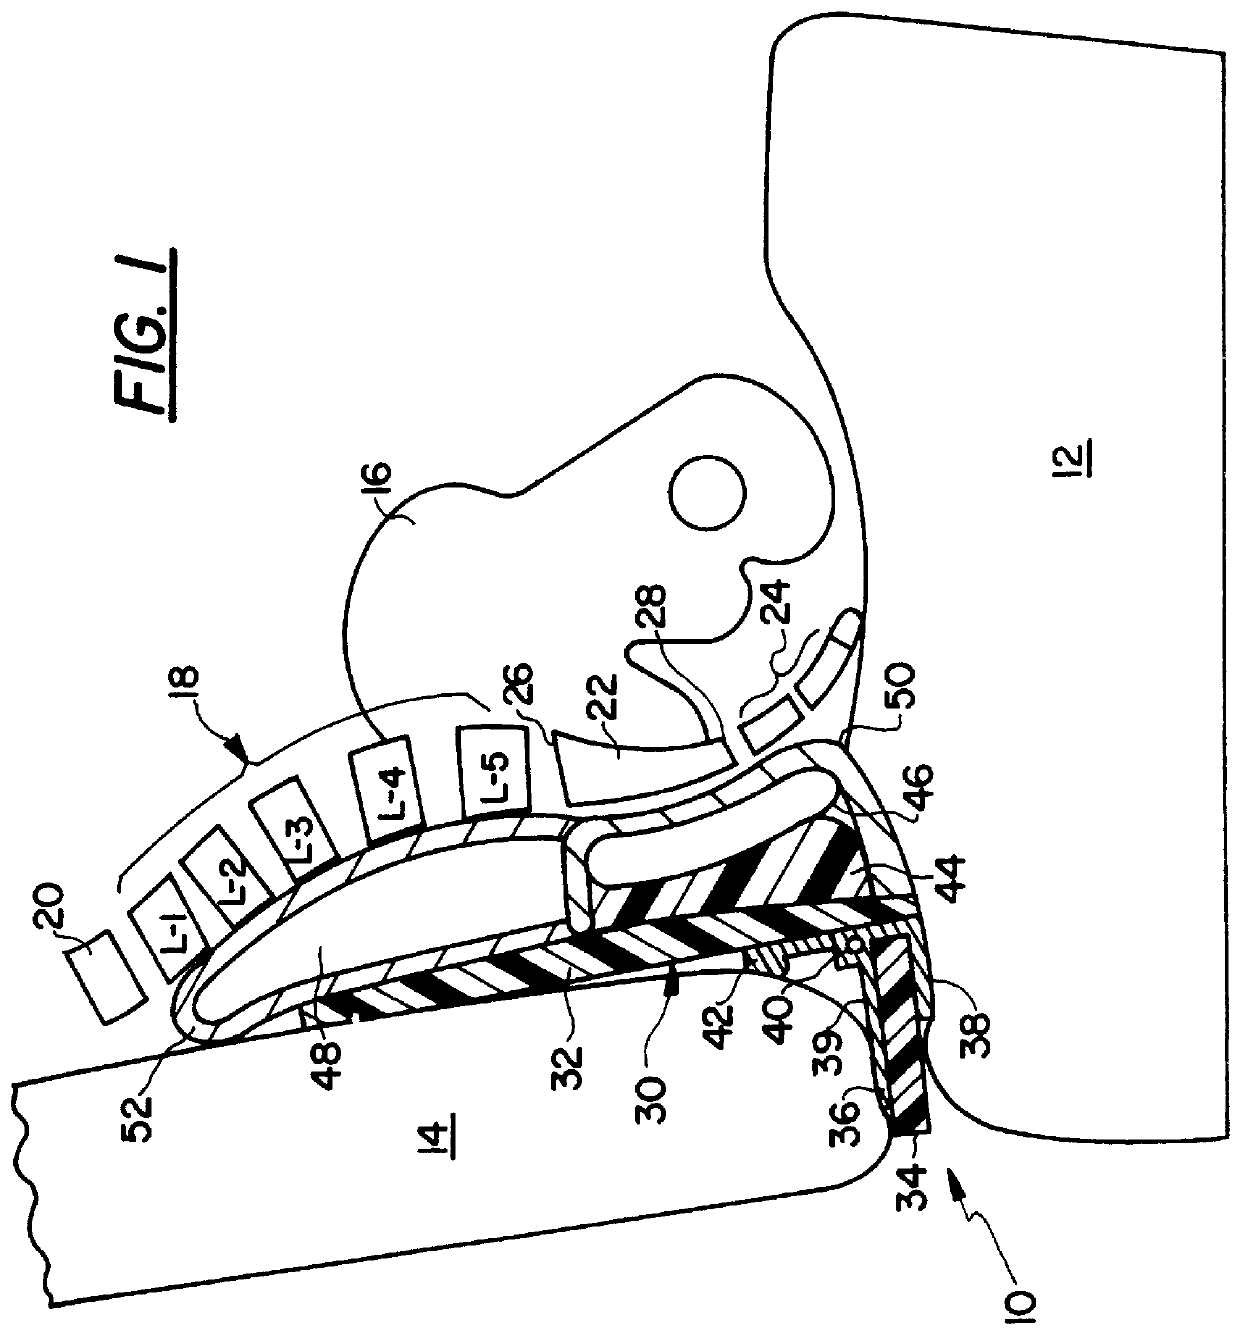 Spinal support system for seating